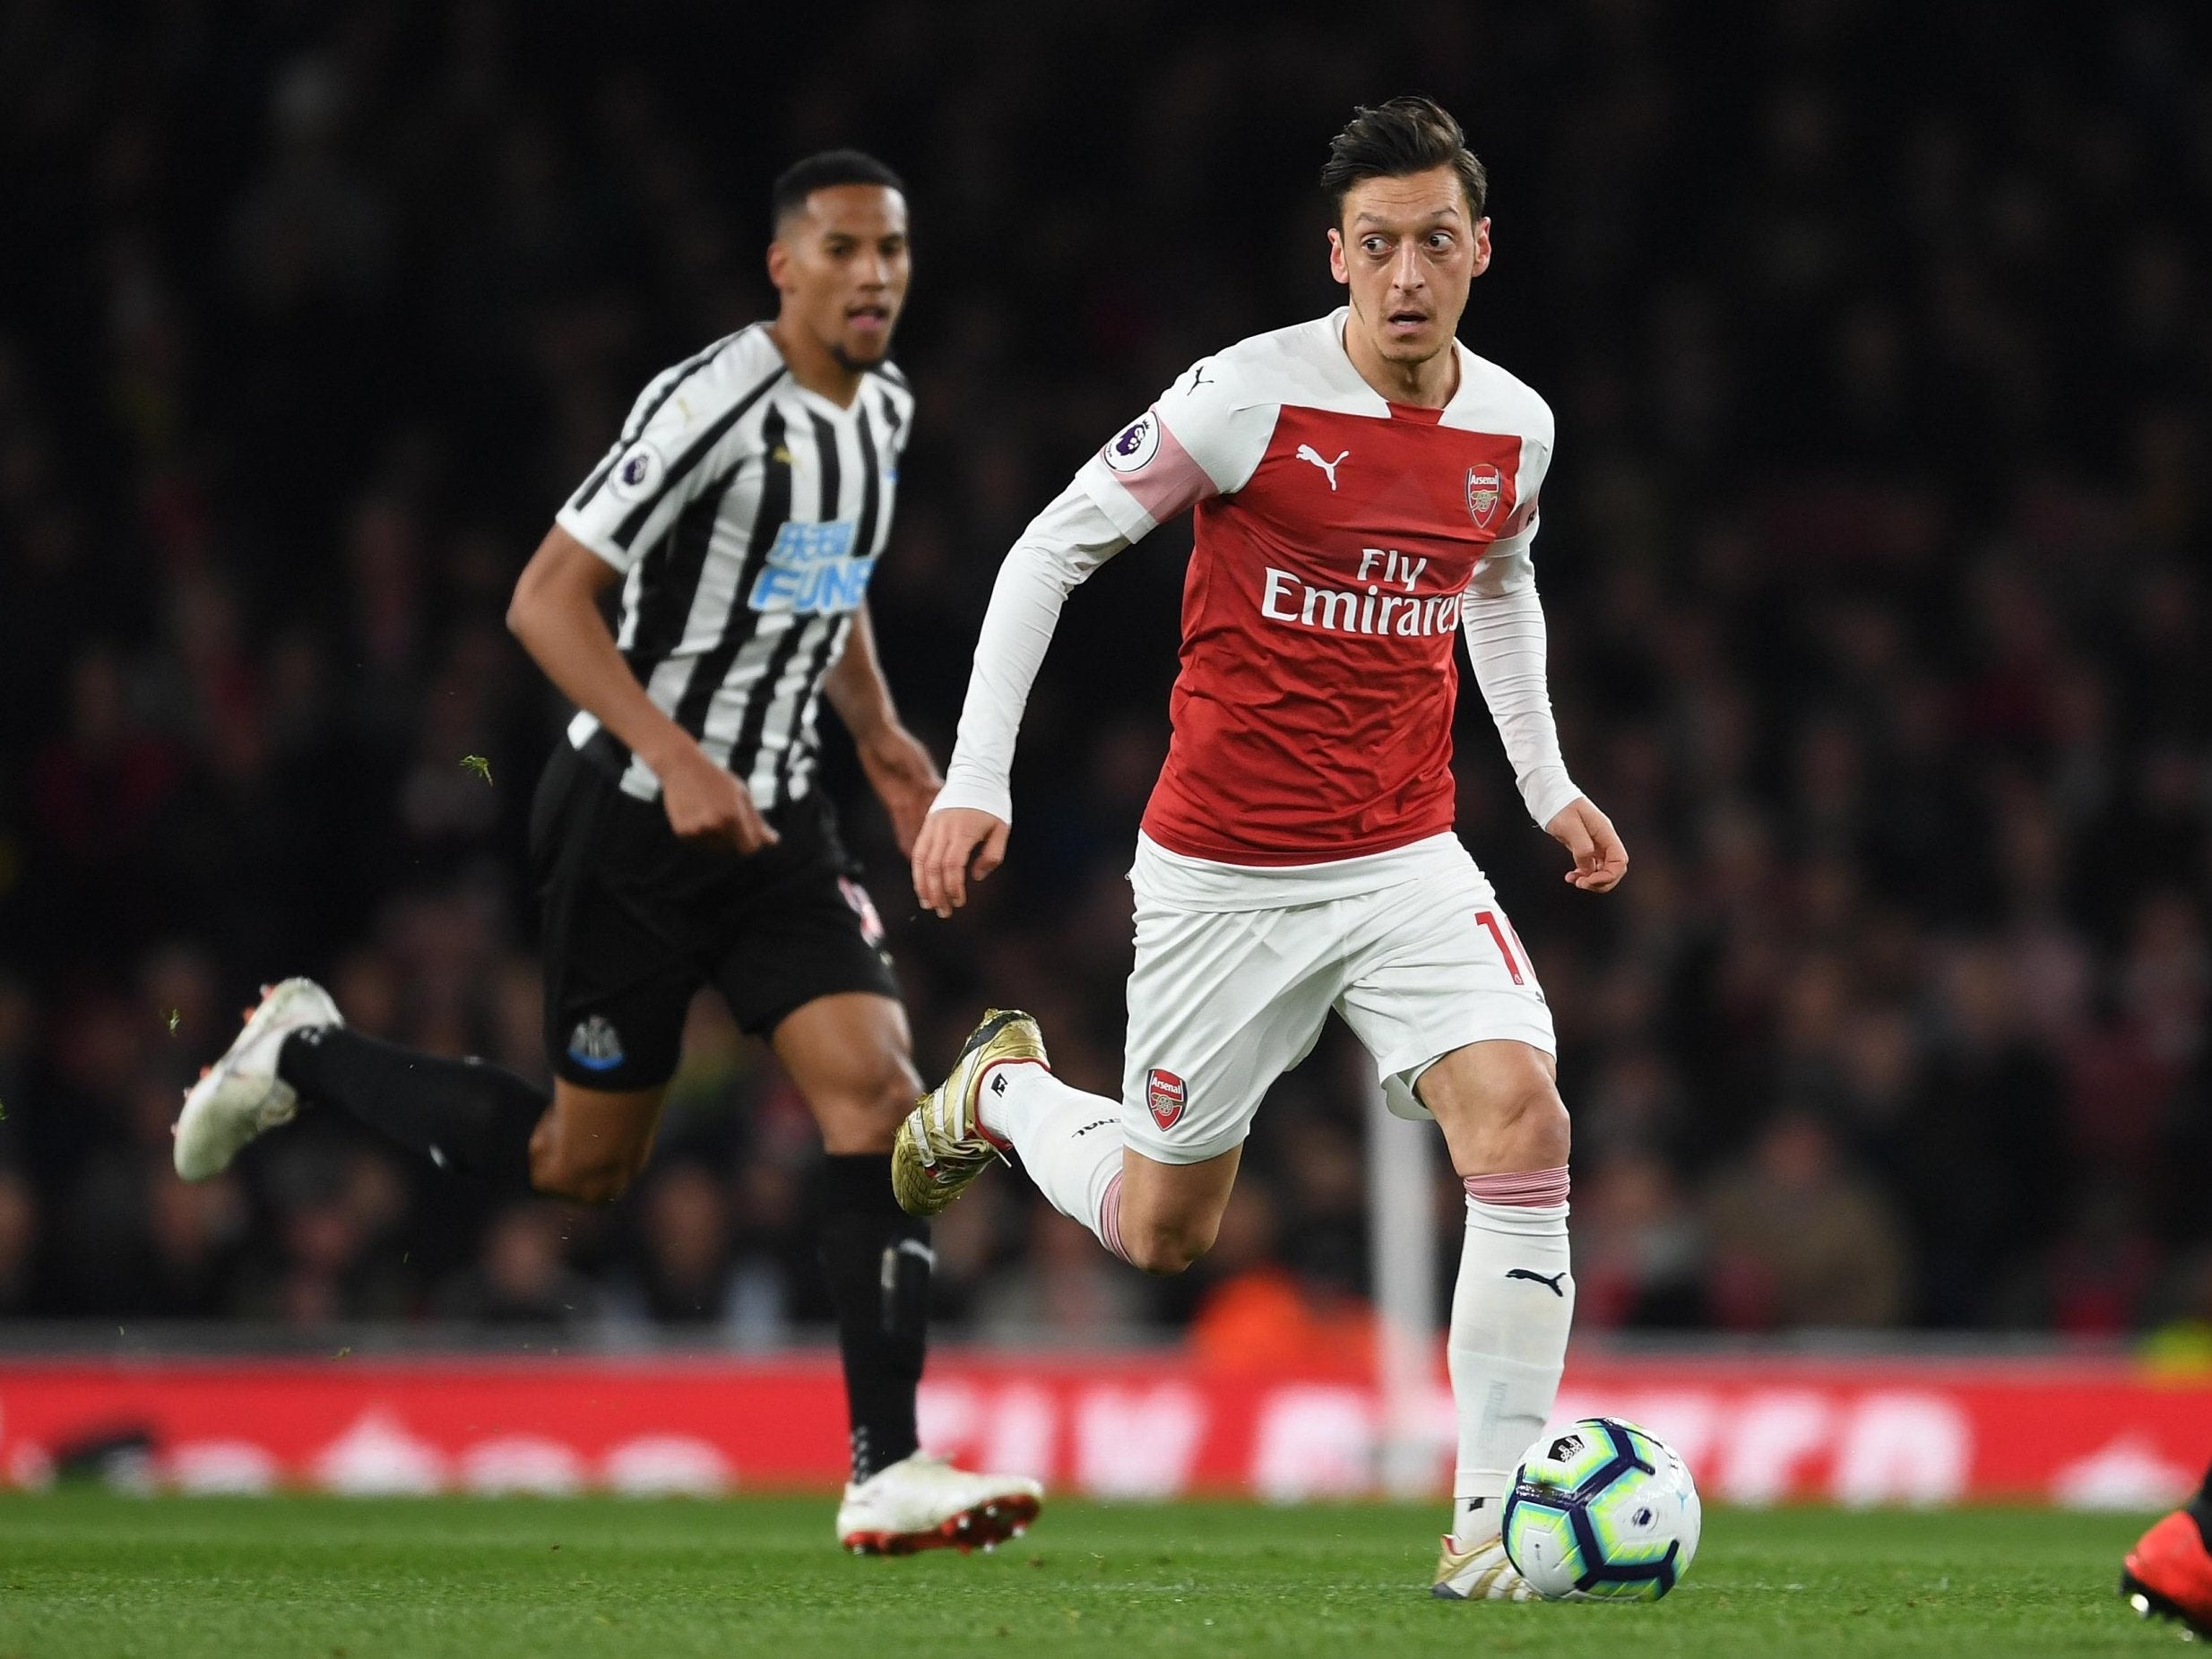 Arsenal news: Mesut Ozil is now 'a team player' and can start against Everton, says Unai Emery